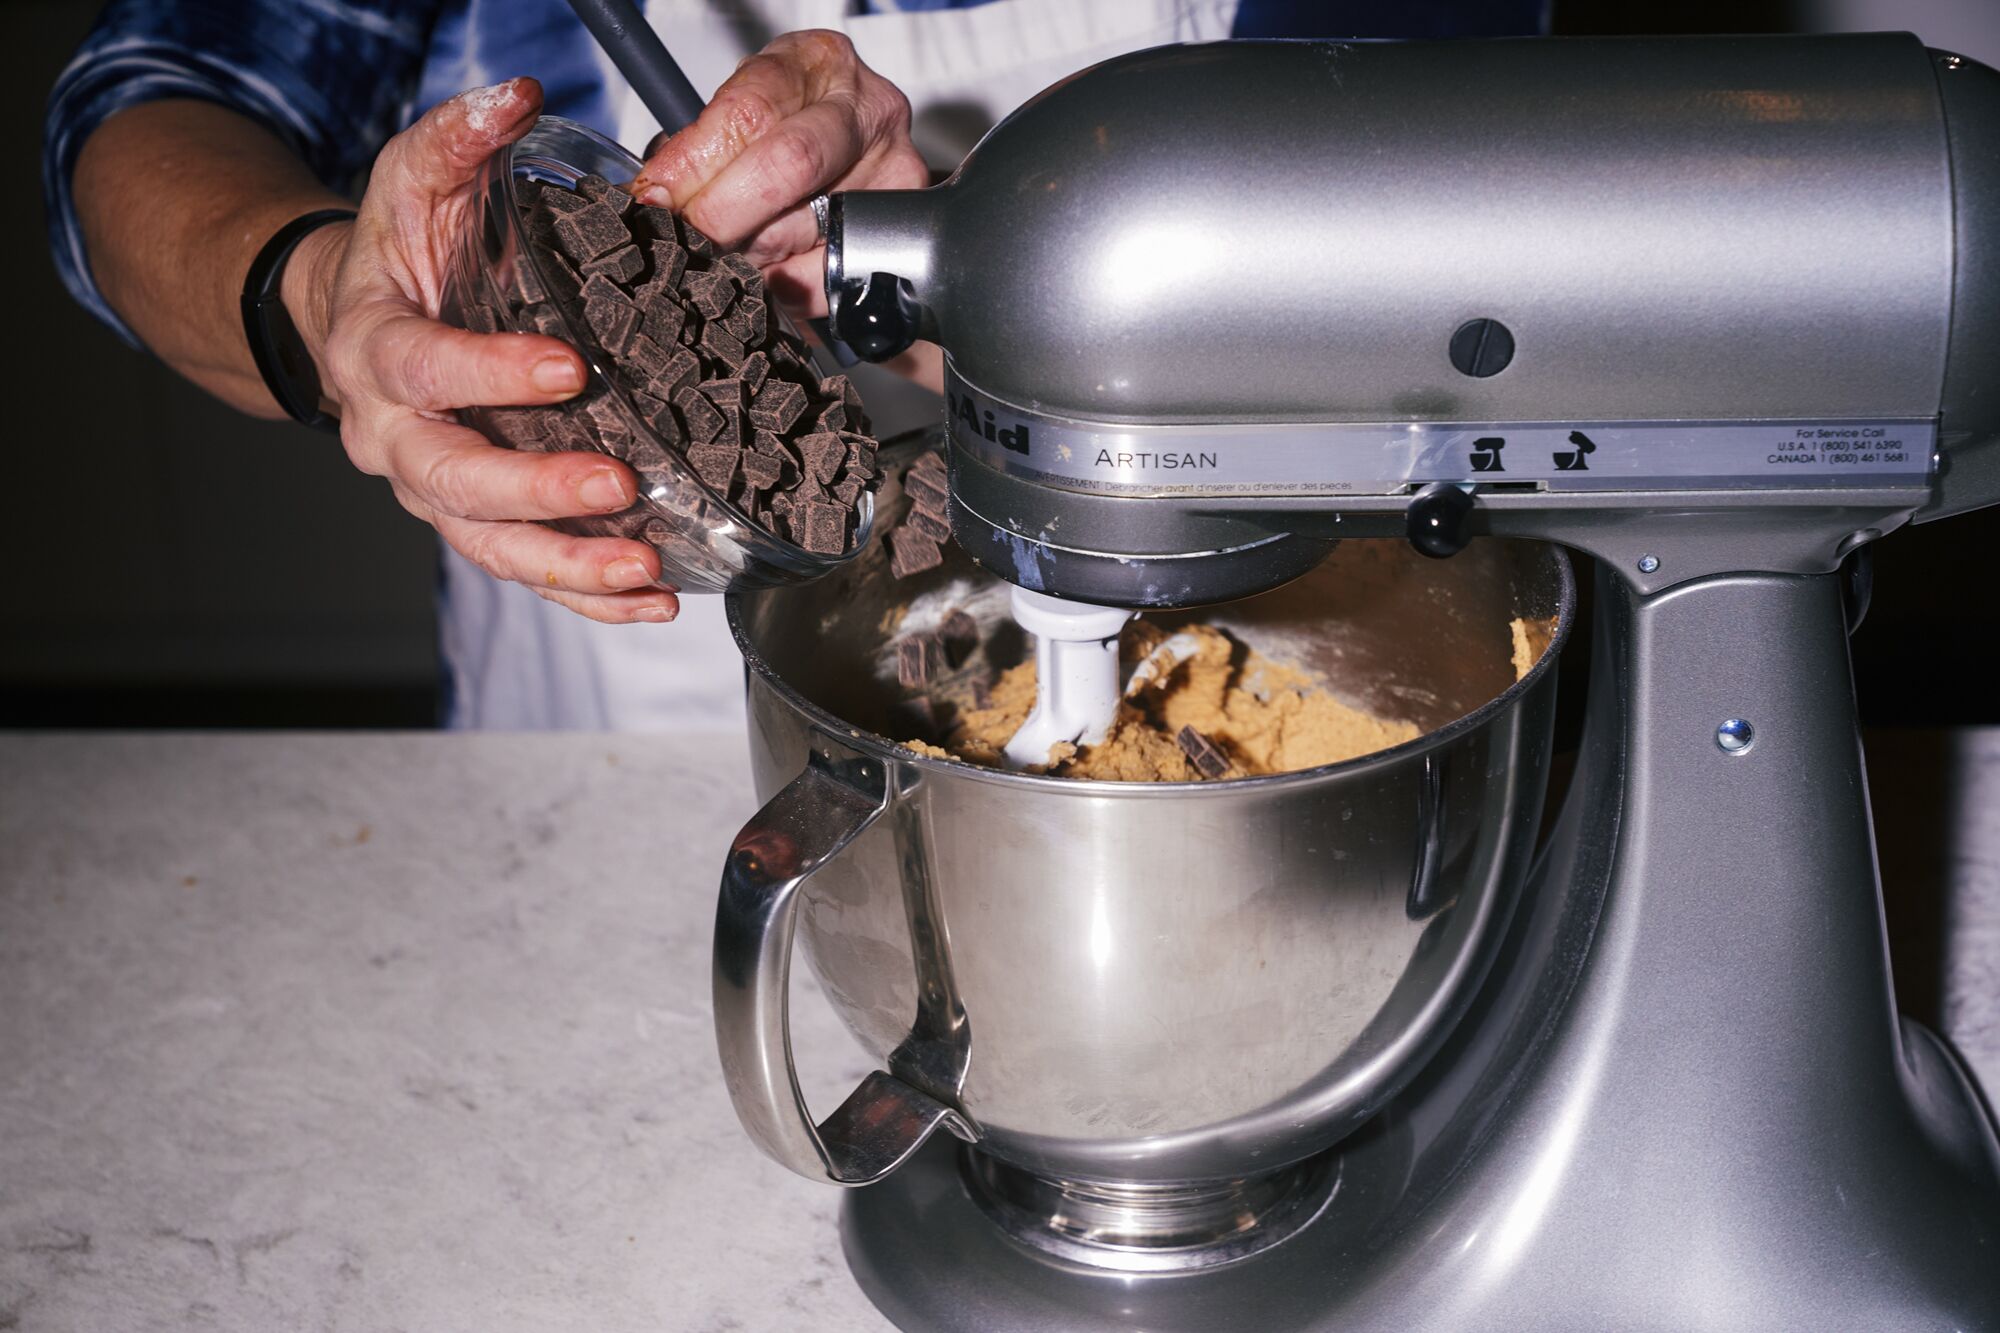 Hands pour a bowl of chocolate chunks into a stand mixer.